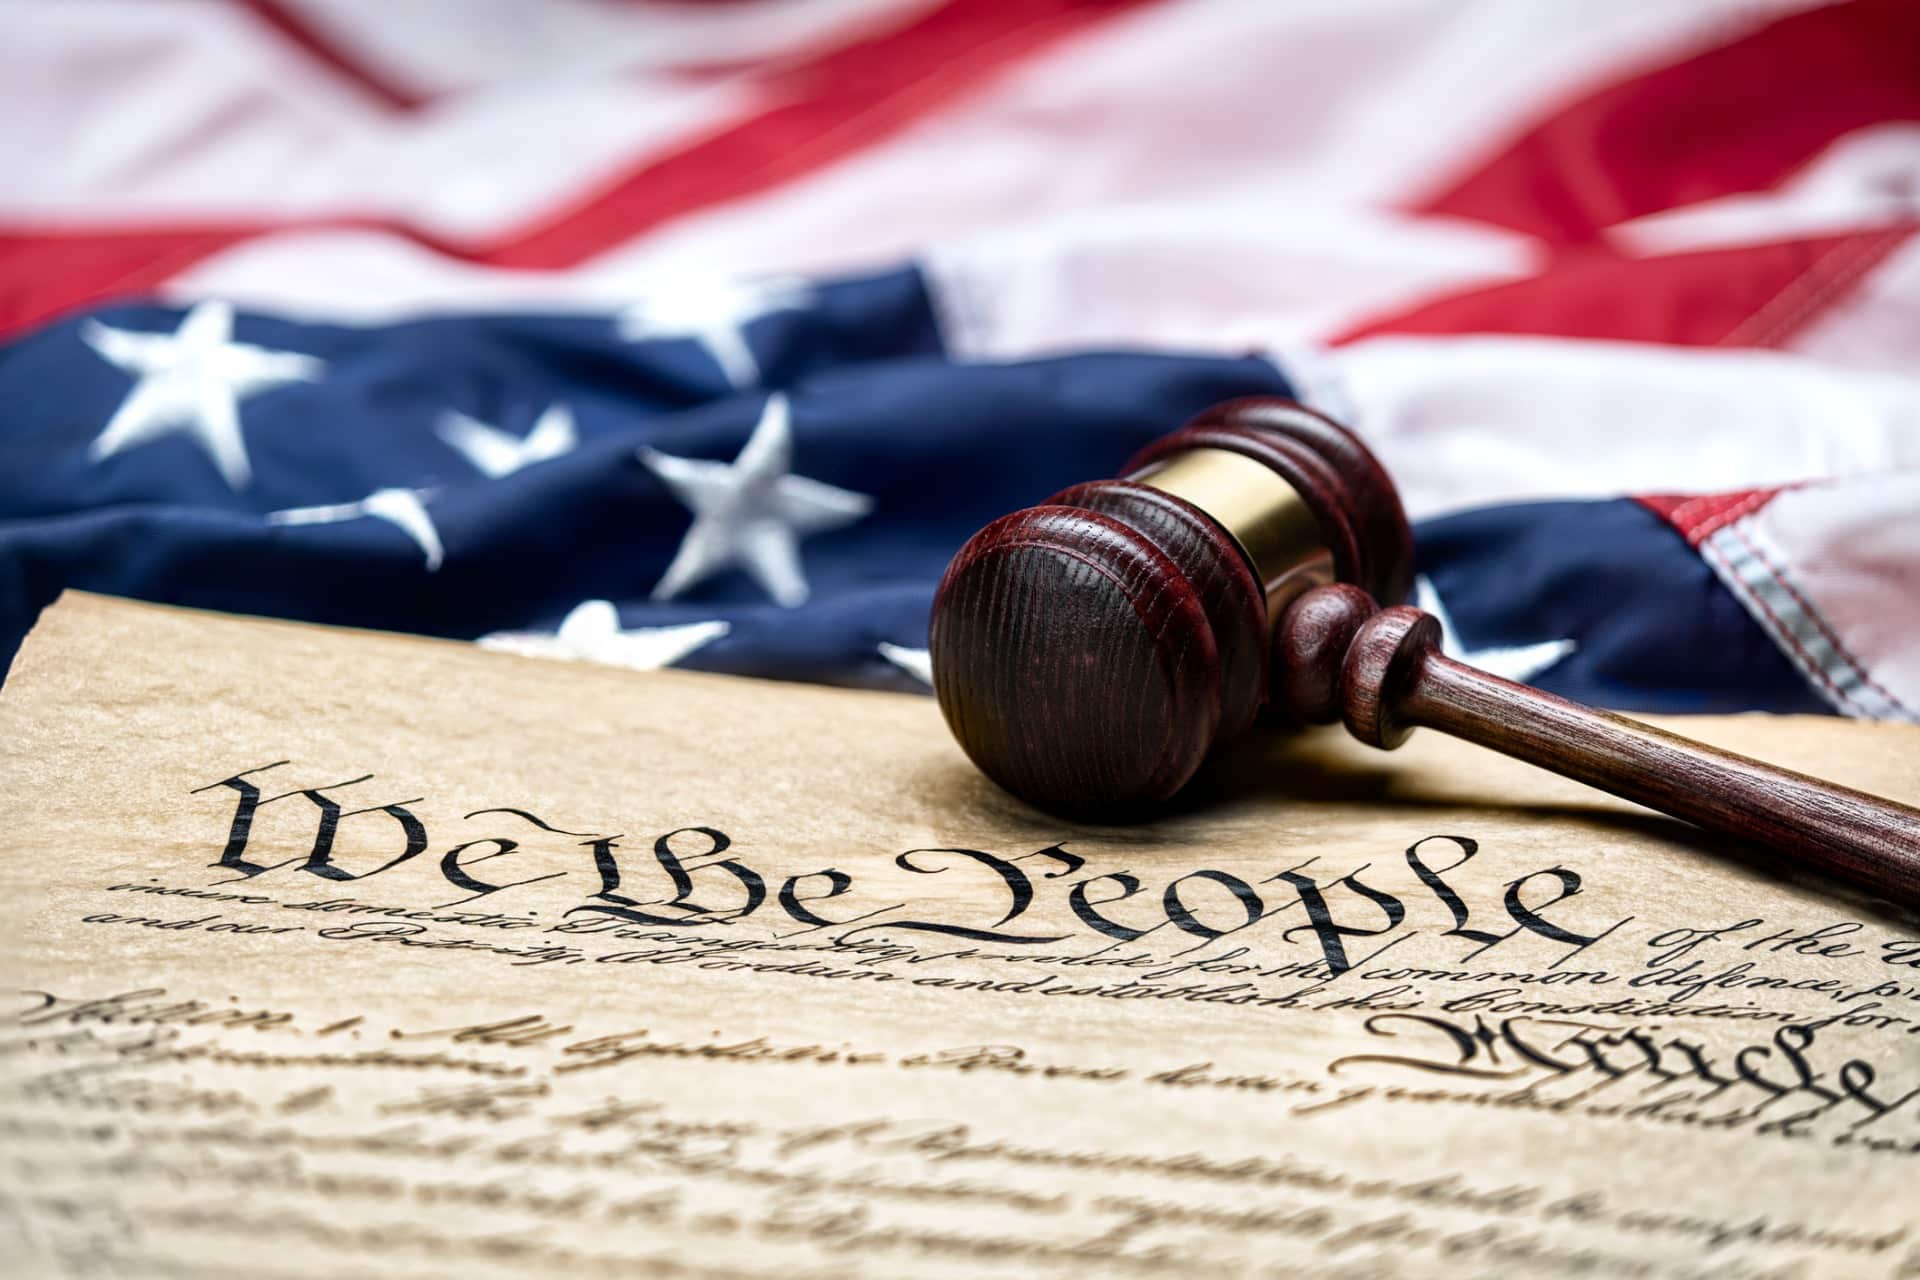 This is a photo of the US Constitution, the American flag, and a gavel.